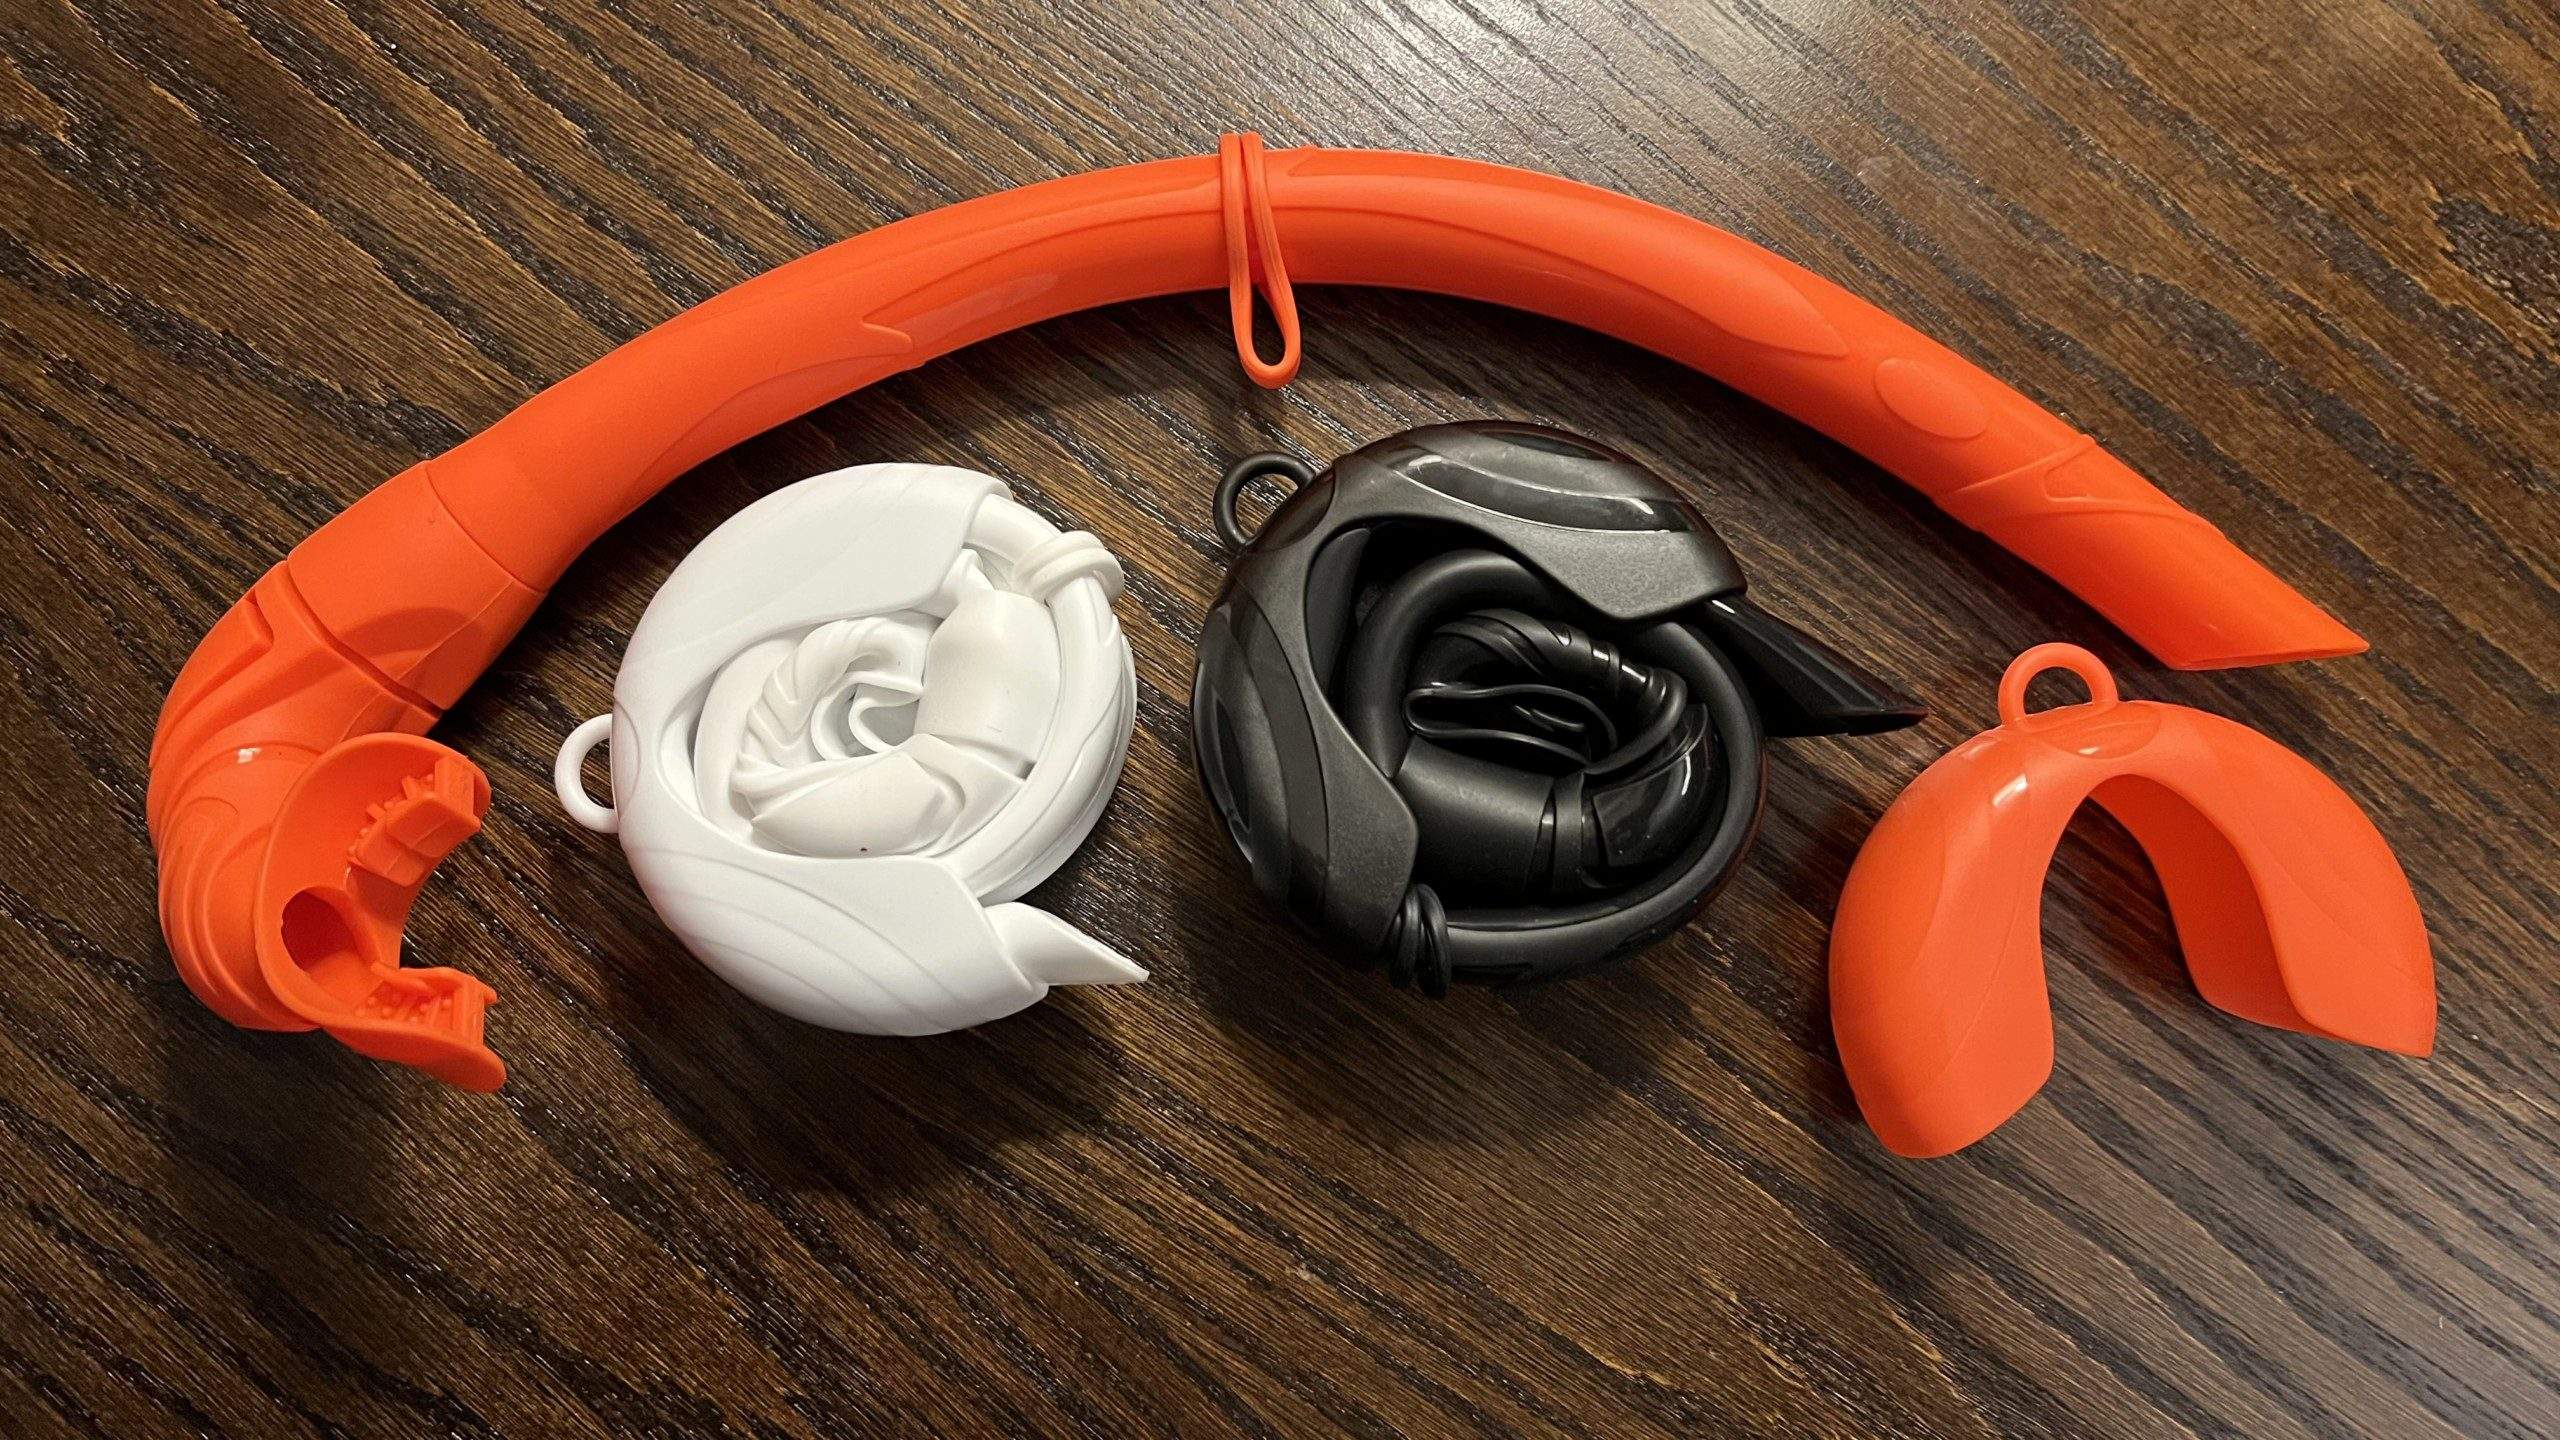 Three foldable silicone snorkels of different color: orange, black, and white.